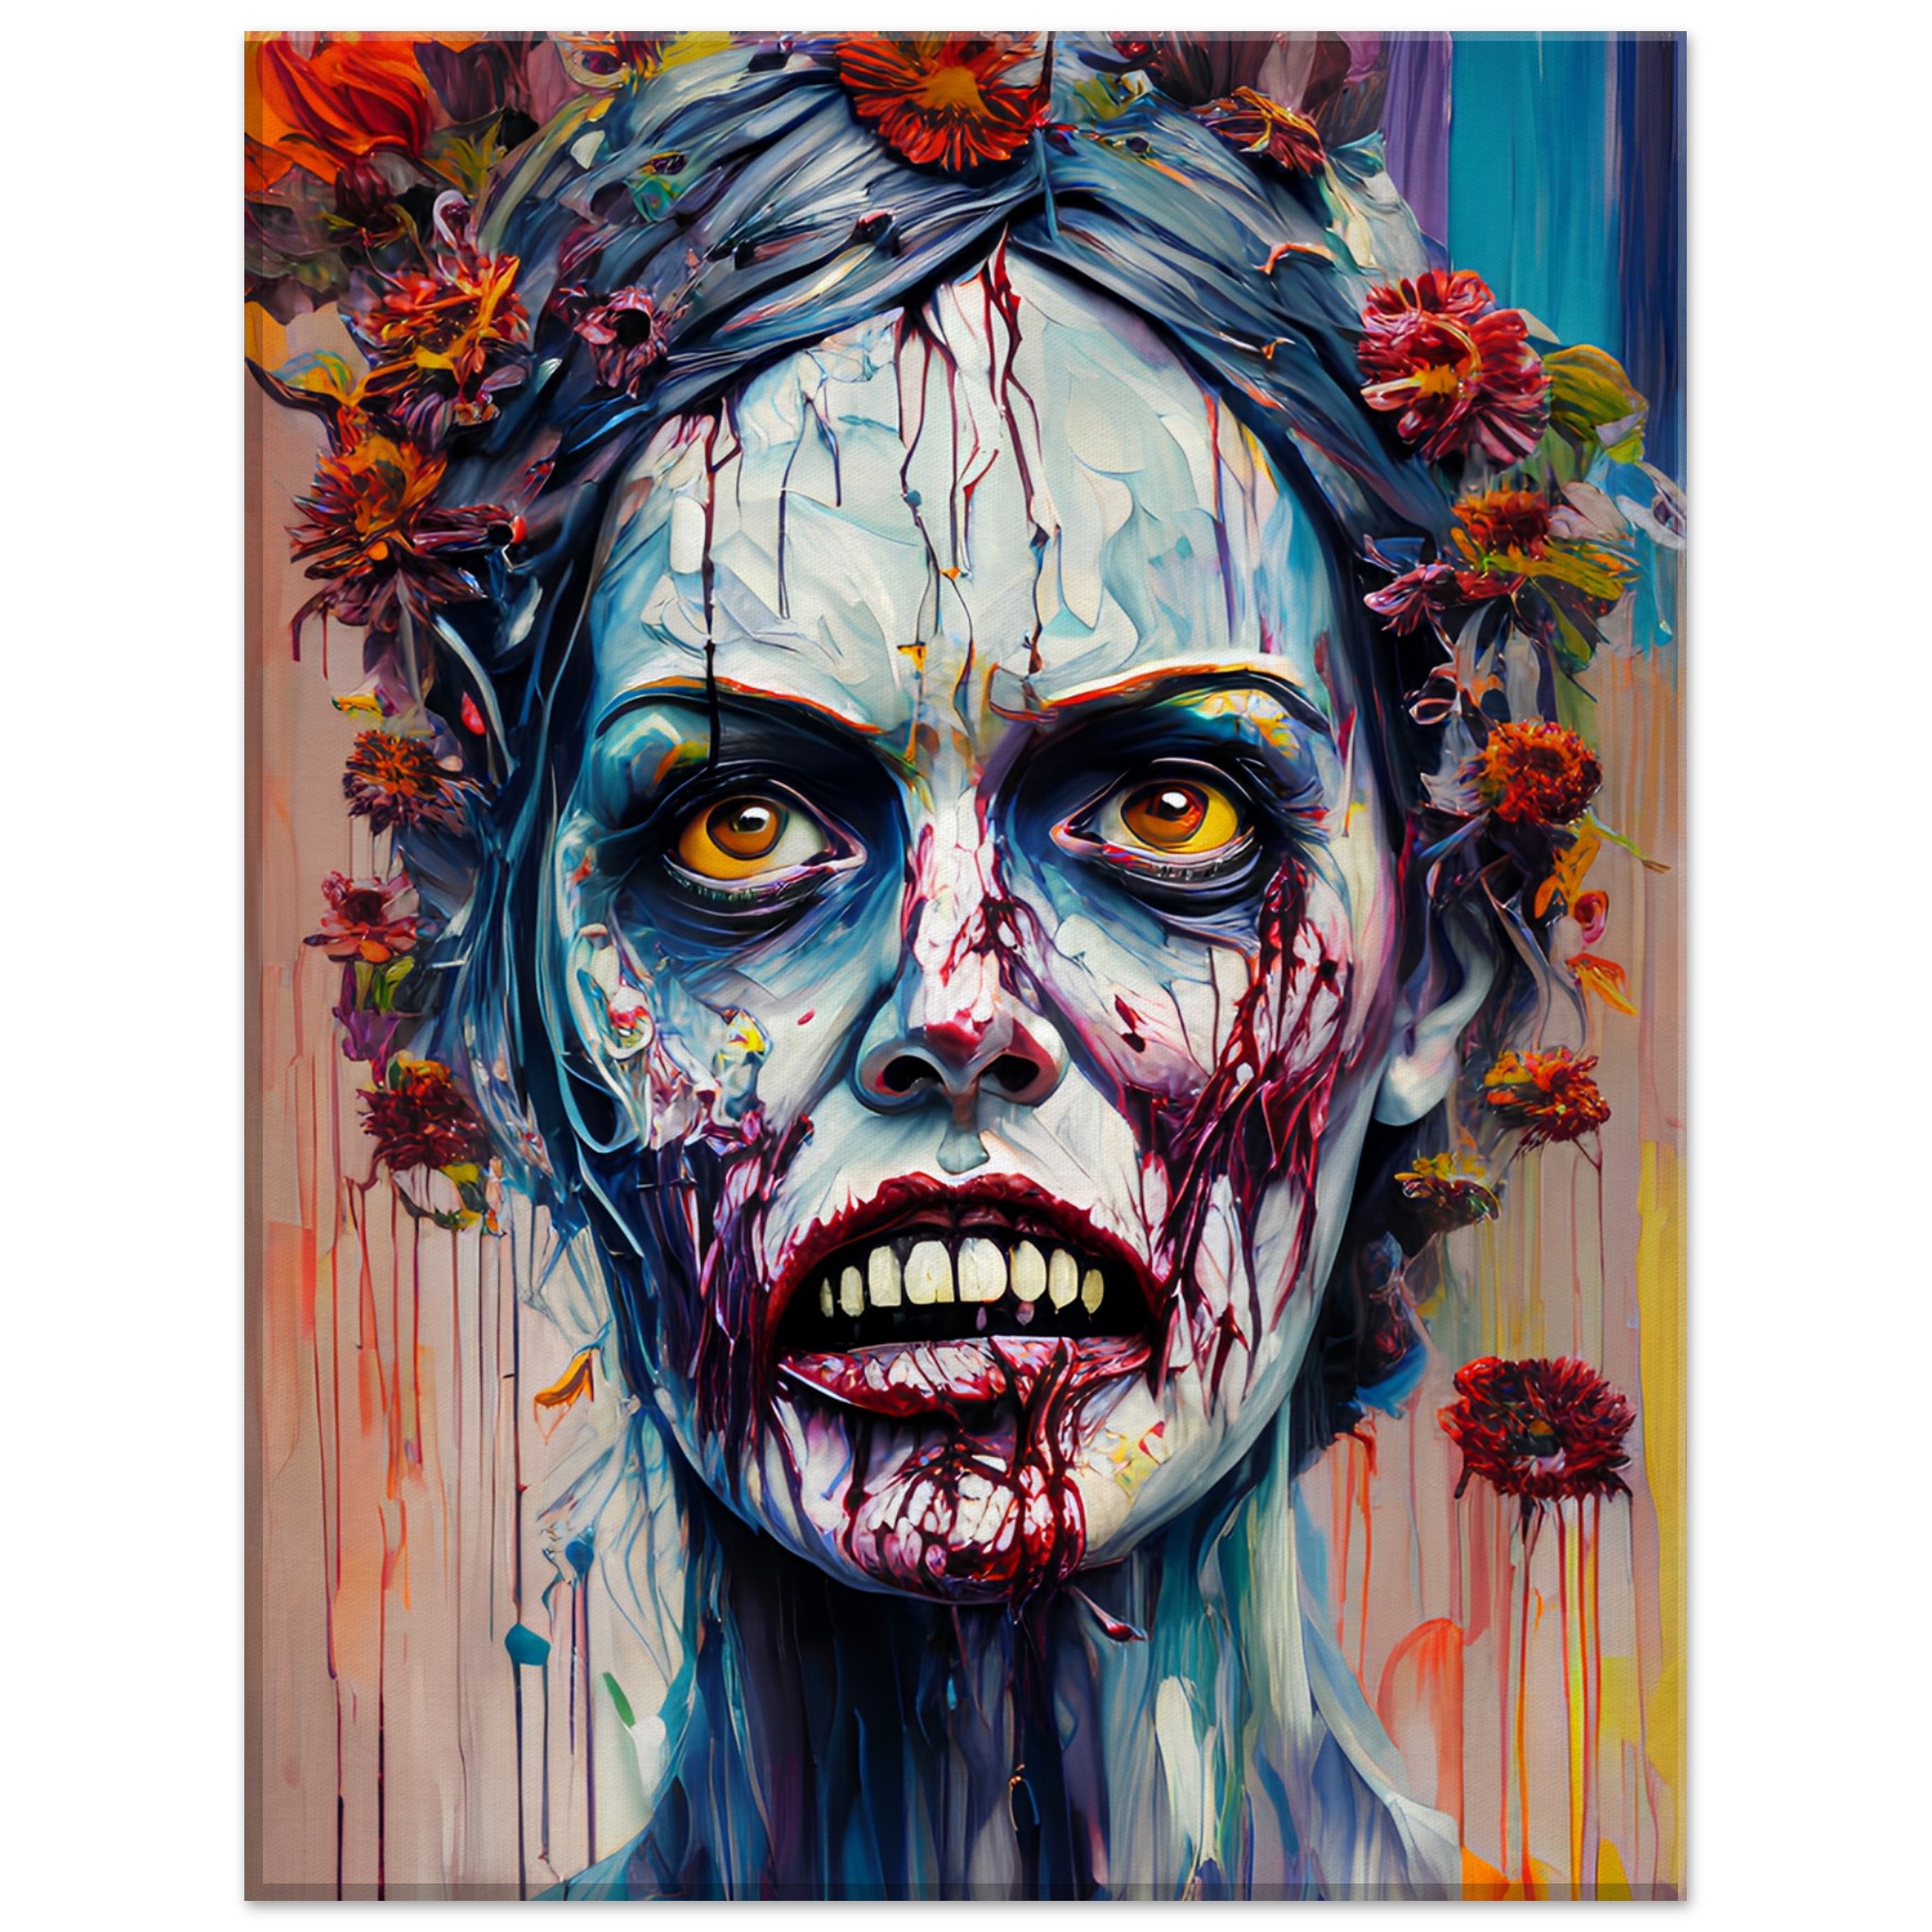 Canvas print of a zombie woman